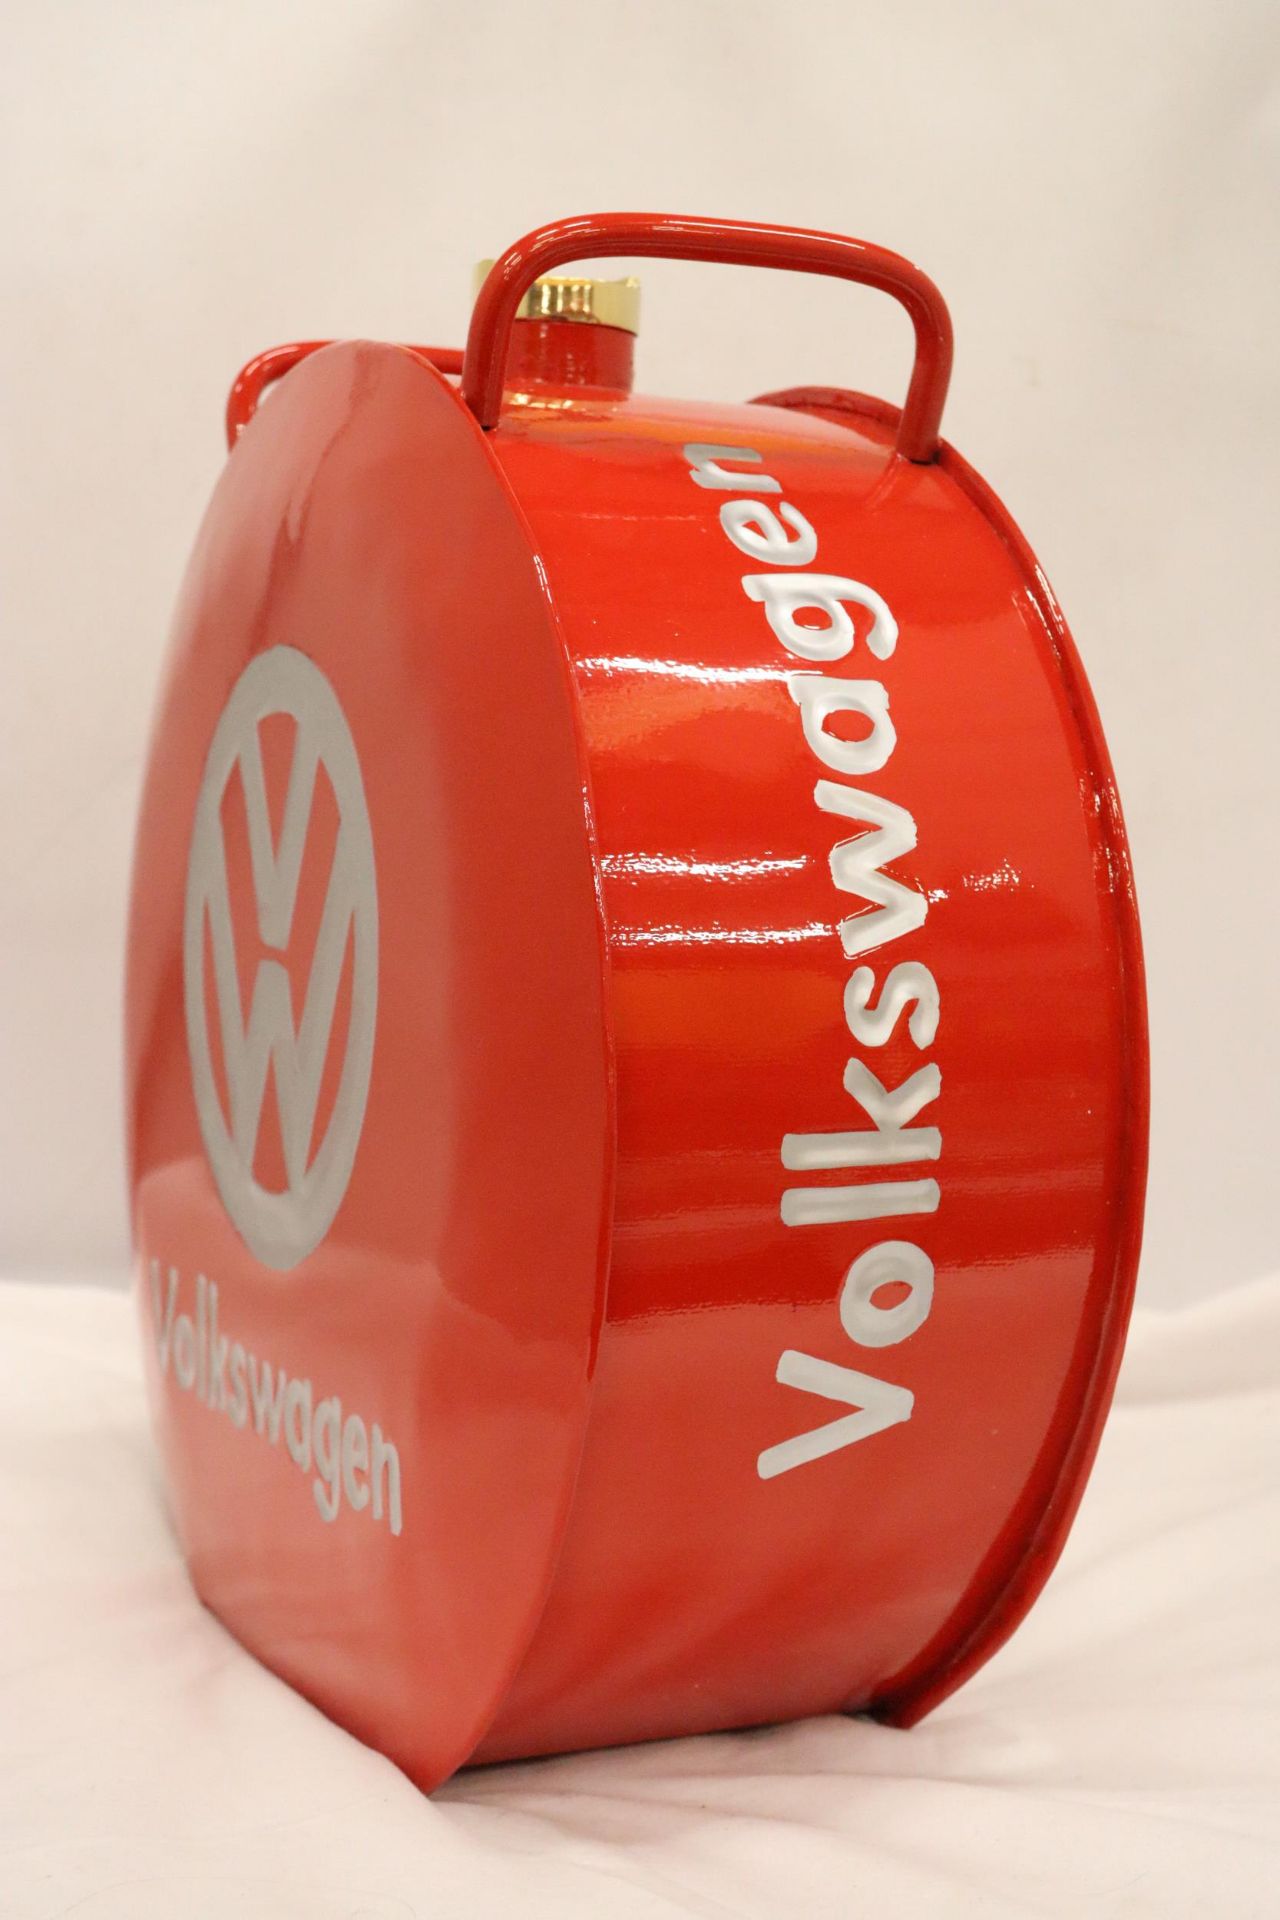 A LARGE RED VOLKSWAGON PETRO CAN - Image 2 of 5